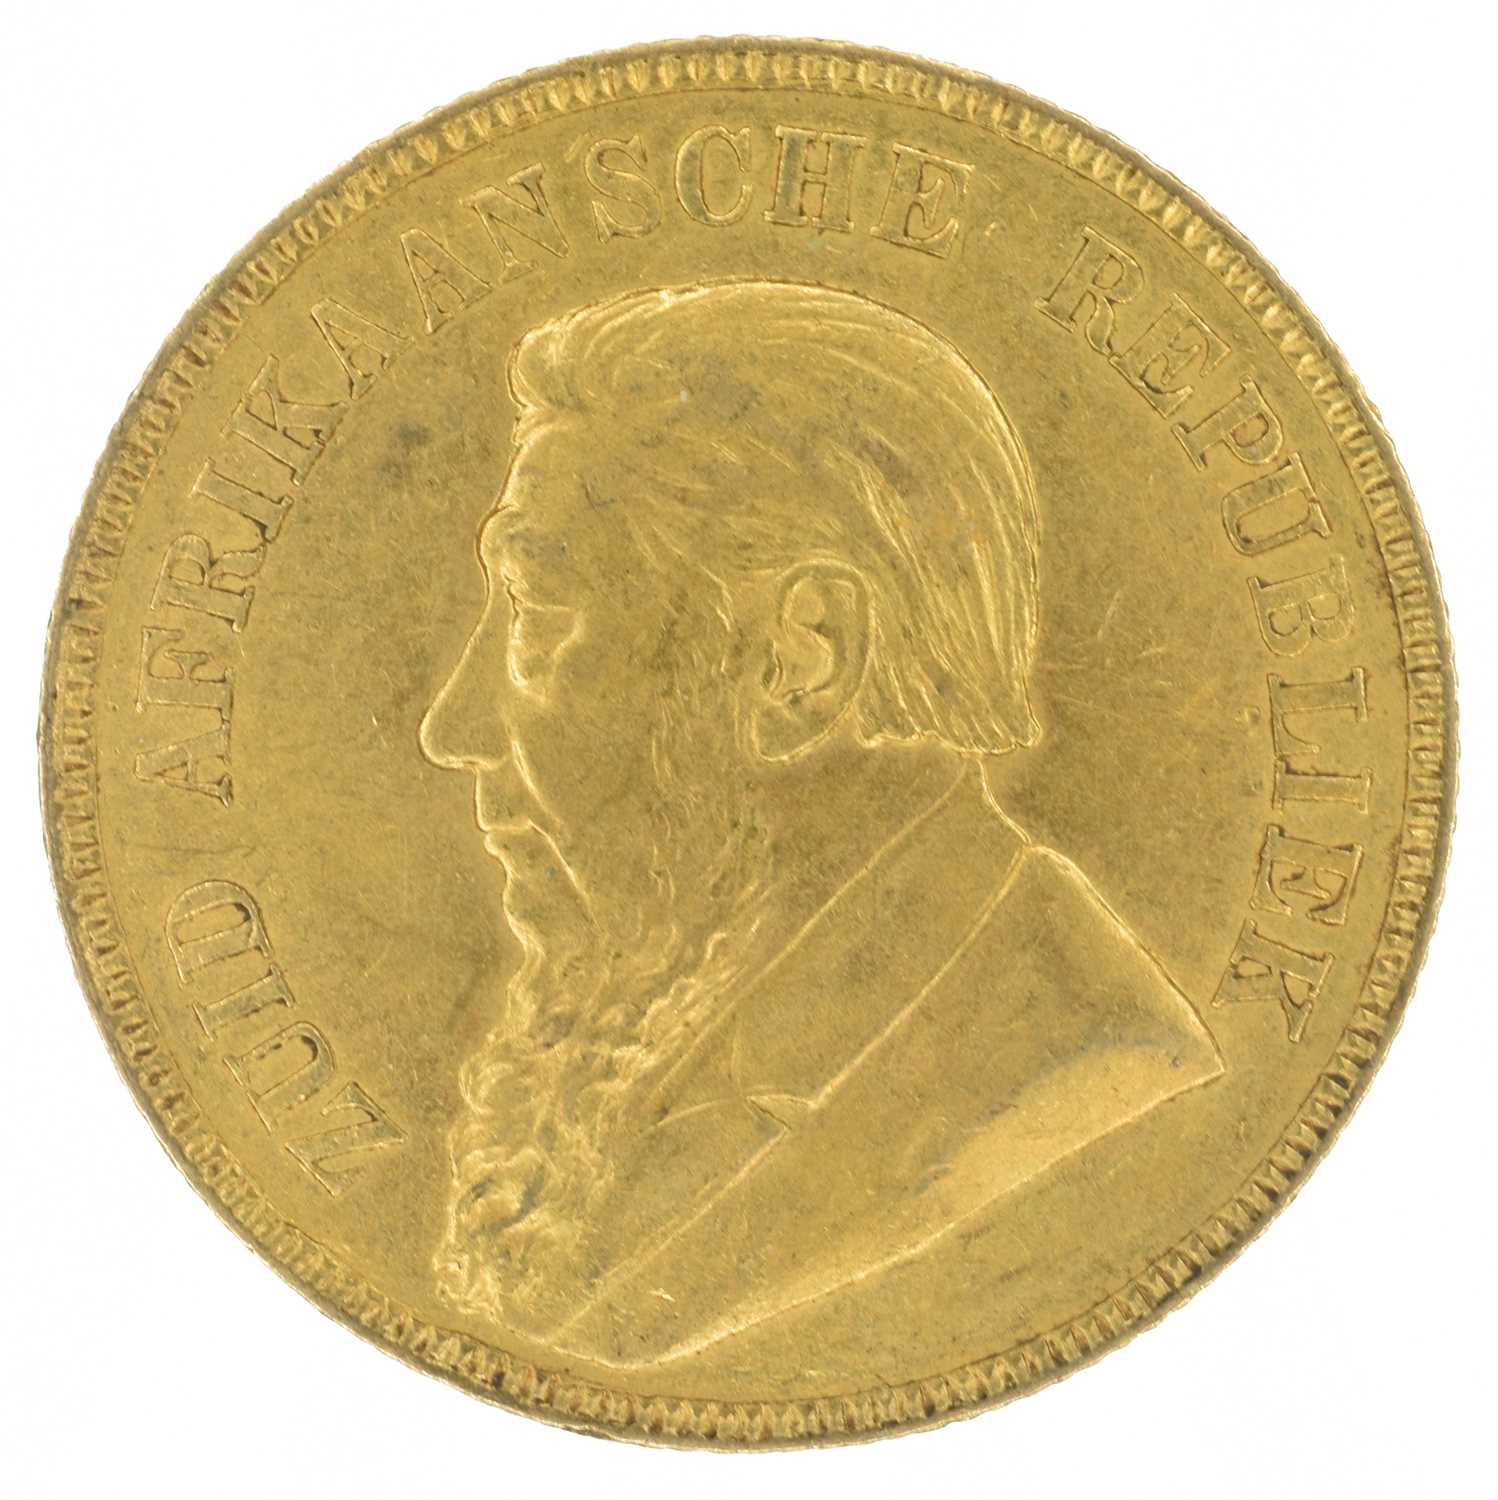 Lot 60 - South African, One Pond (Pound), 1898, gold coin.